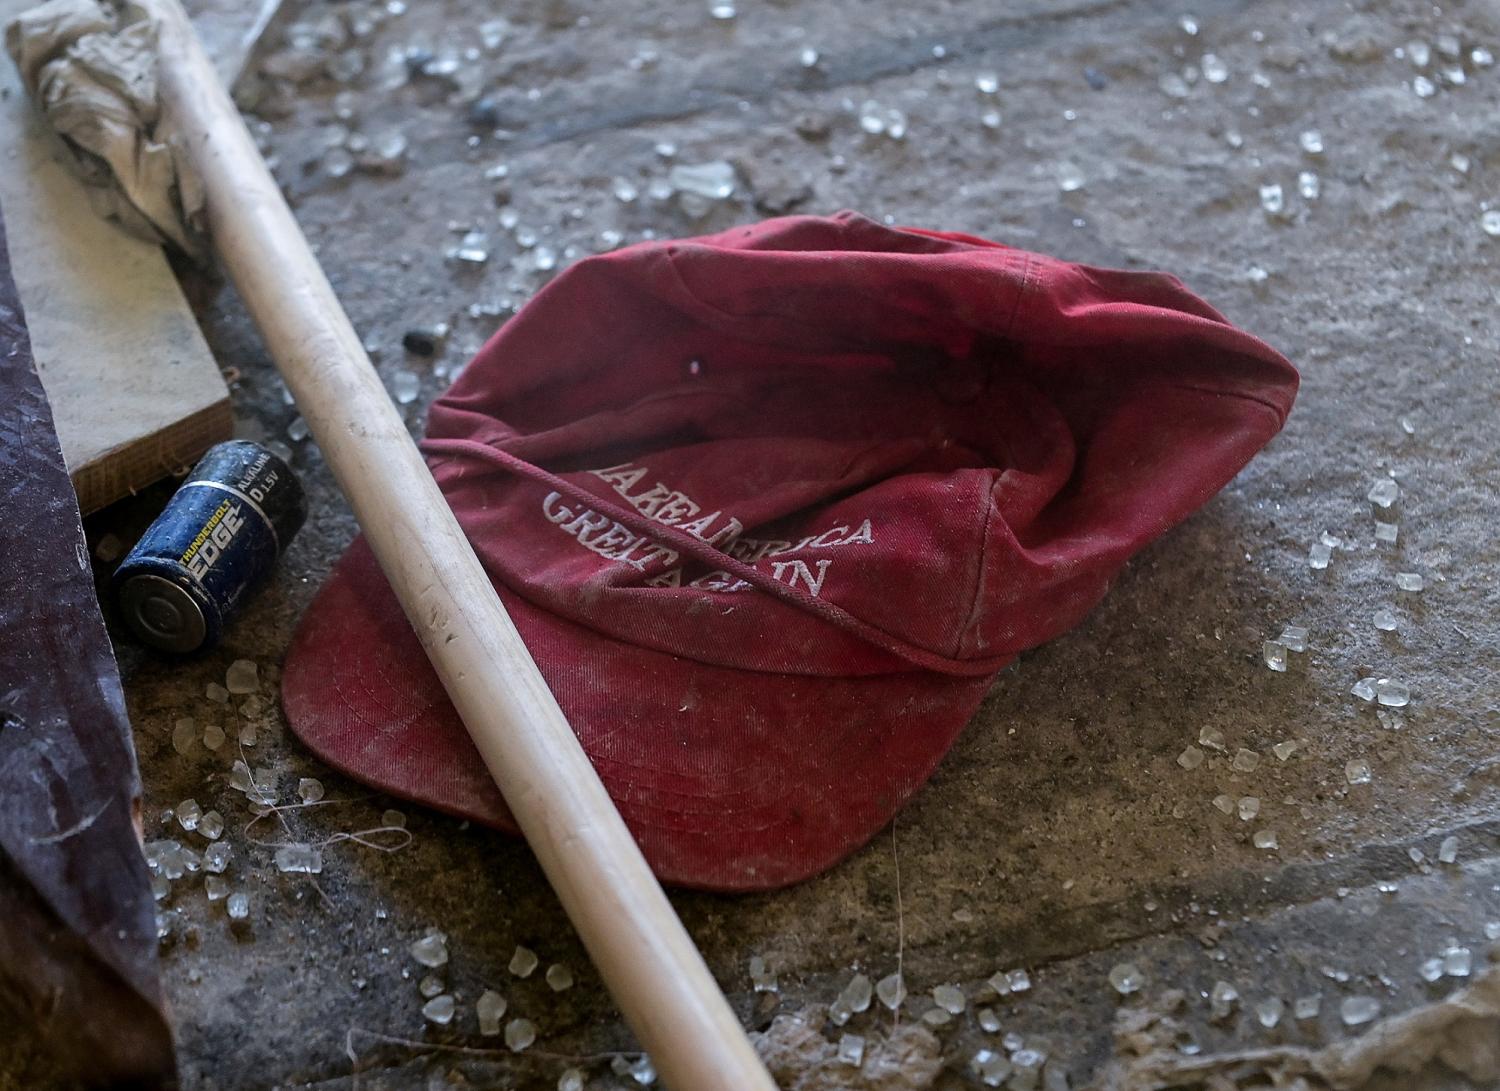 A "Make America Great Again" campaign cap sits in the debris left behind at the West Terrace entrance checkpoint of the U.S. Capitol a day after supporters of U.S. President Donald Trump stormed the Capitol in Washington, U.S., January 7, 2021. REUTERS/Erin Scott